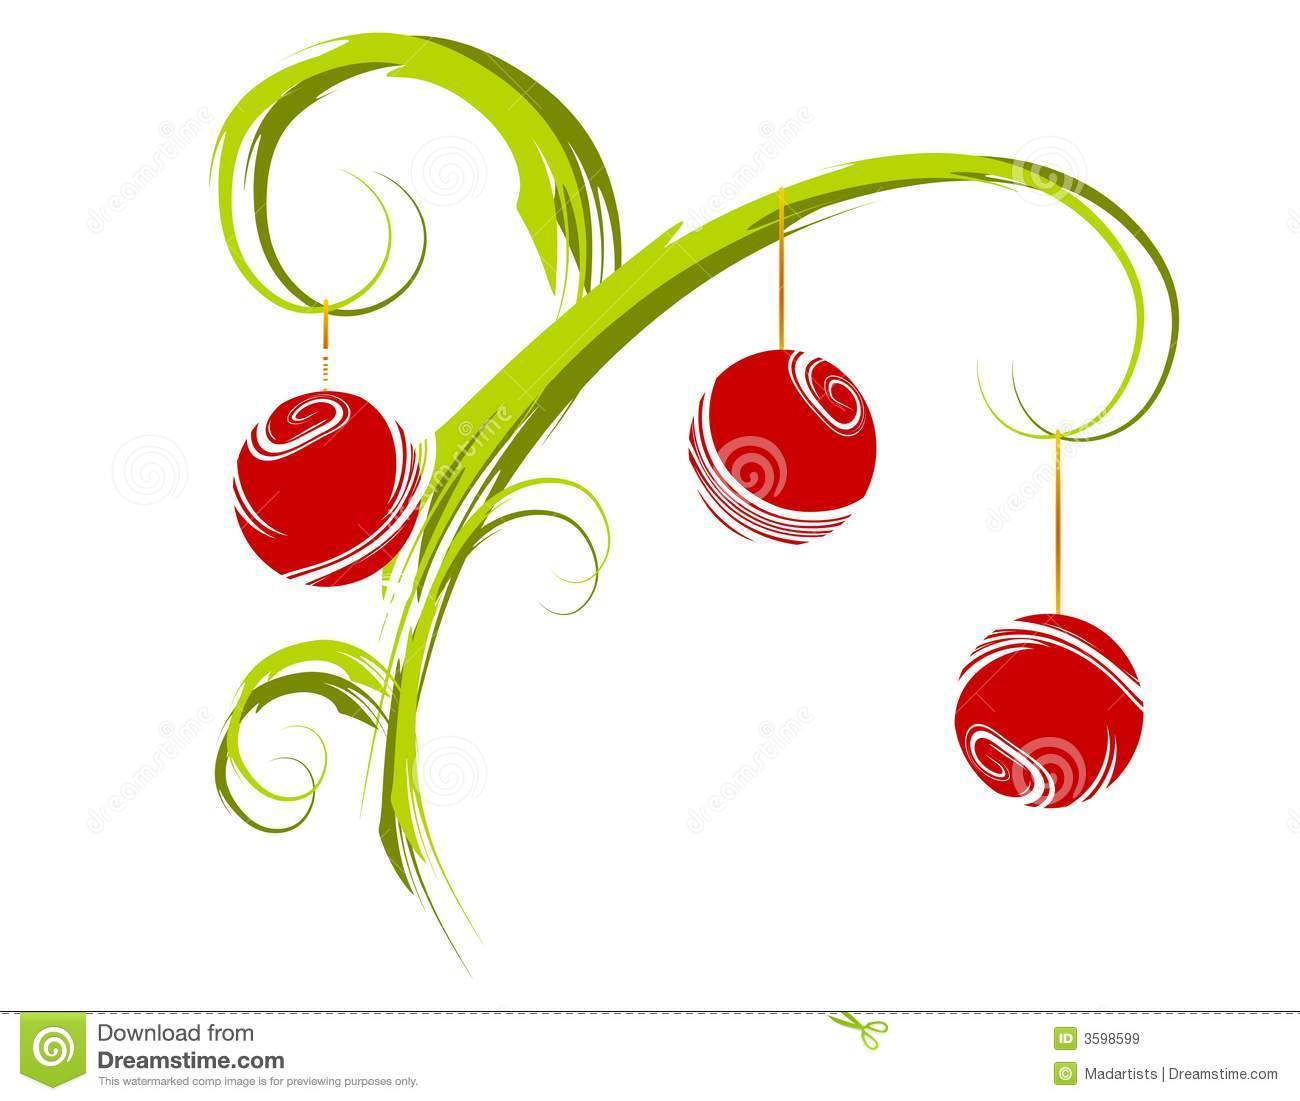 Xmas Tree Branch Ornaments Royalty Free Stock Images   Image  3598599